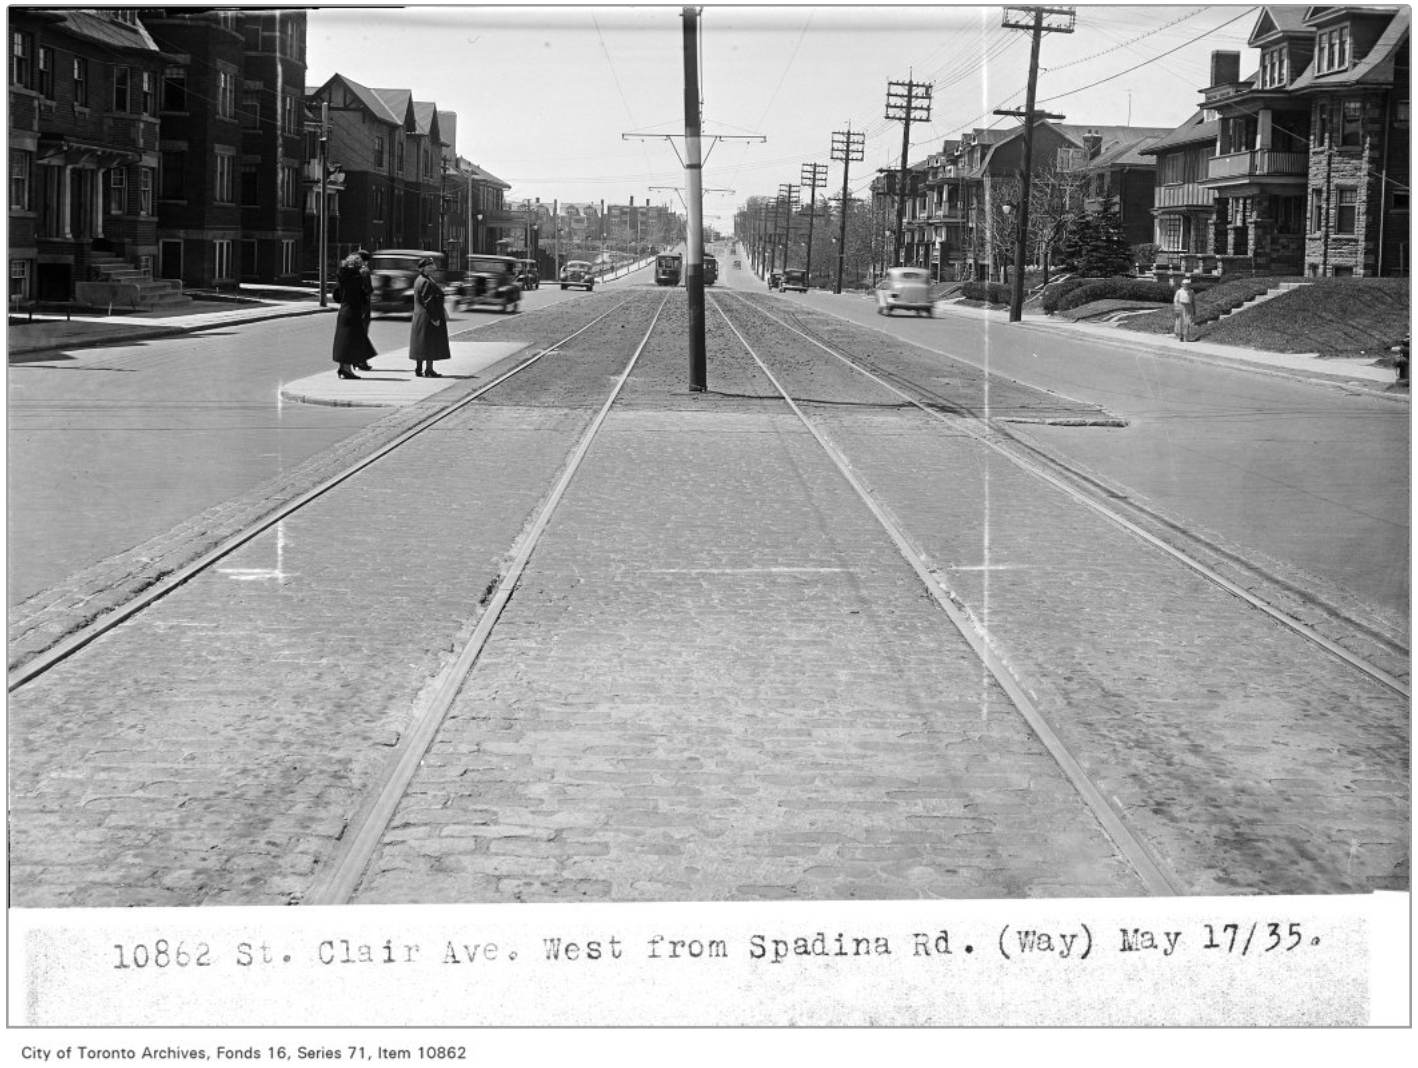 St. Clair Ave West and Spadina - 1935 (Copy)